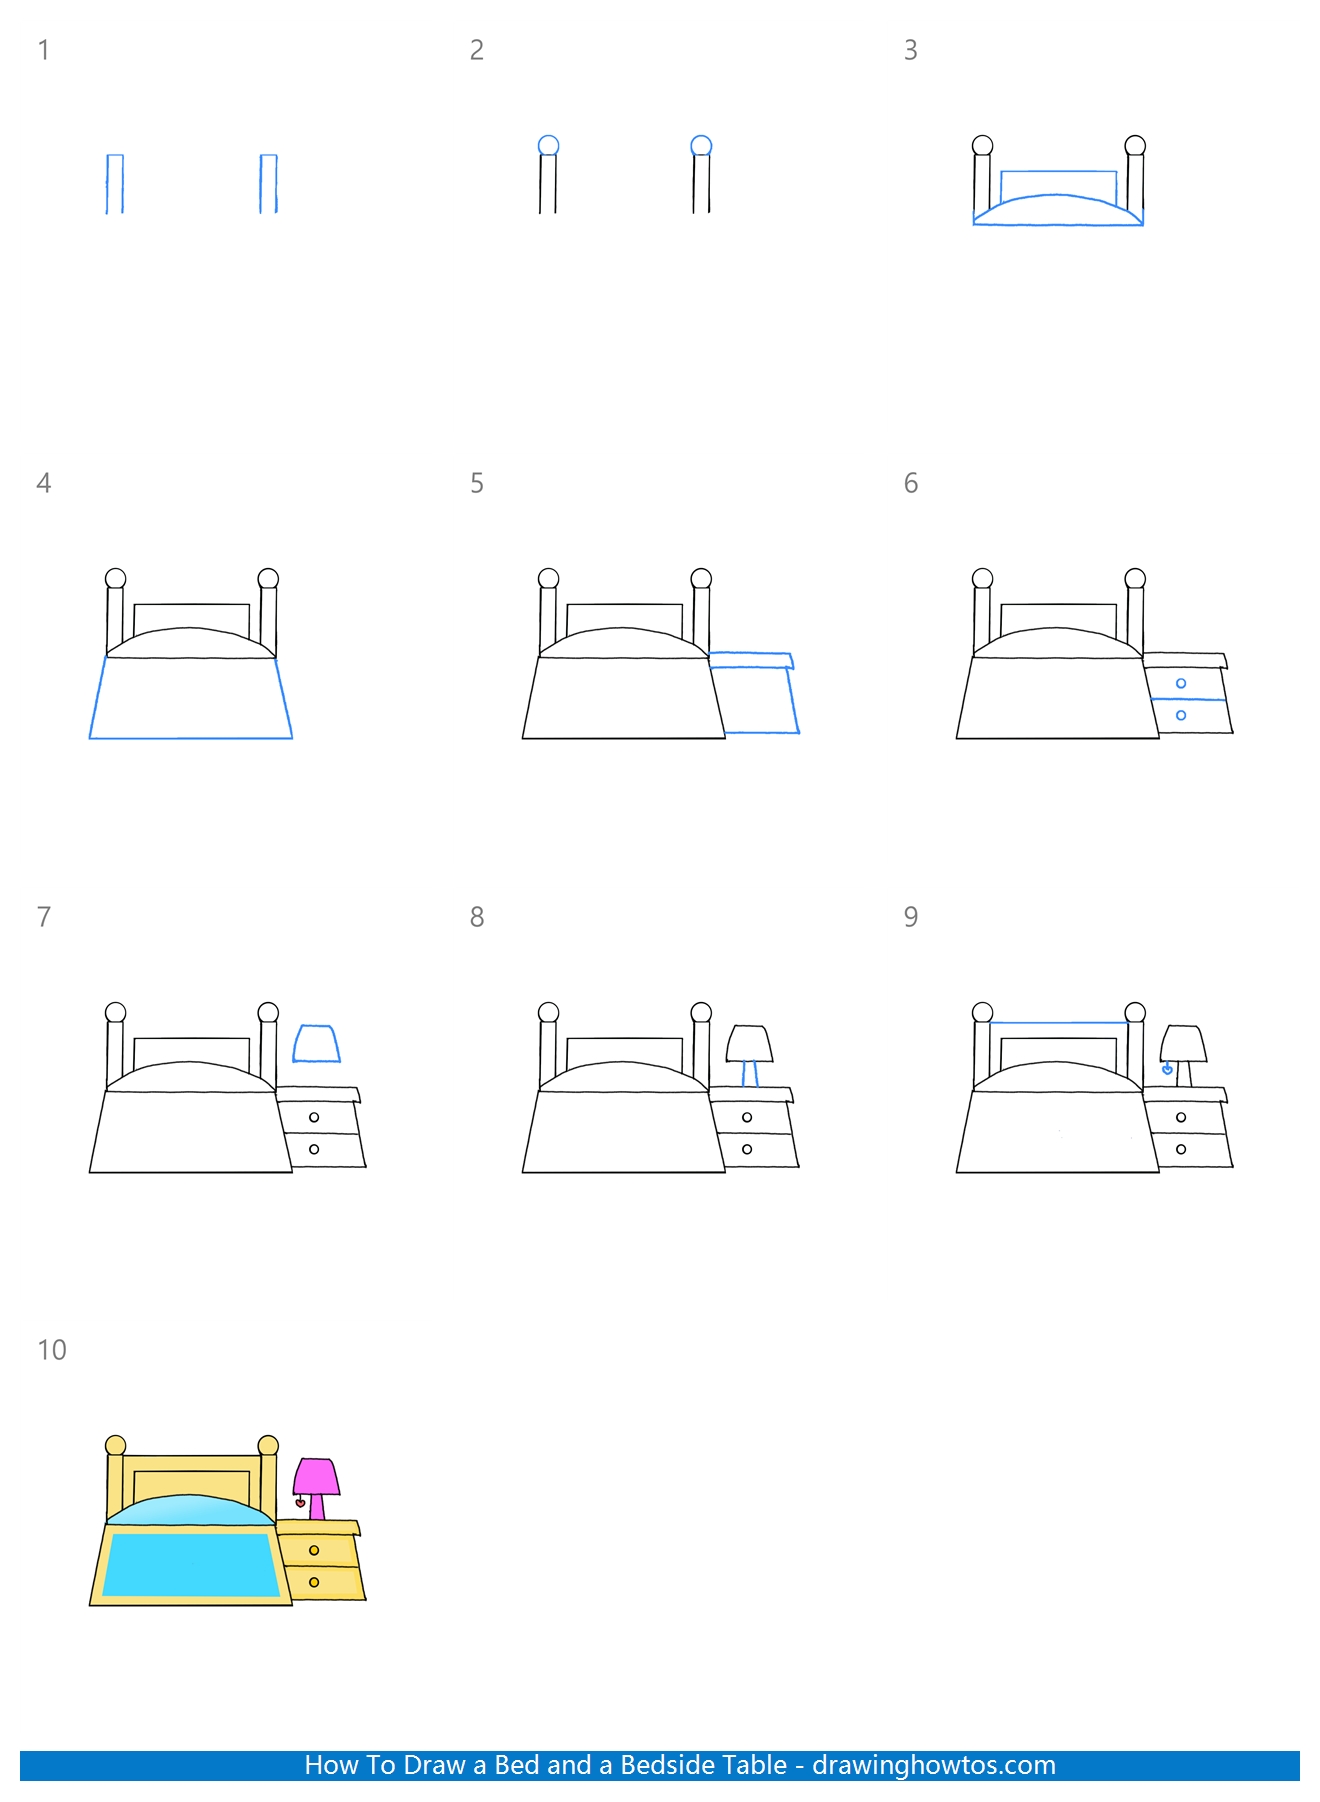 How to Draw a Bed and Bedside Table Step by Step